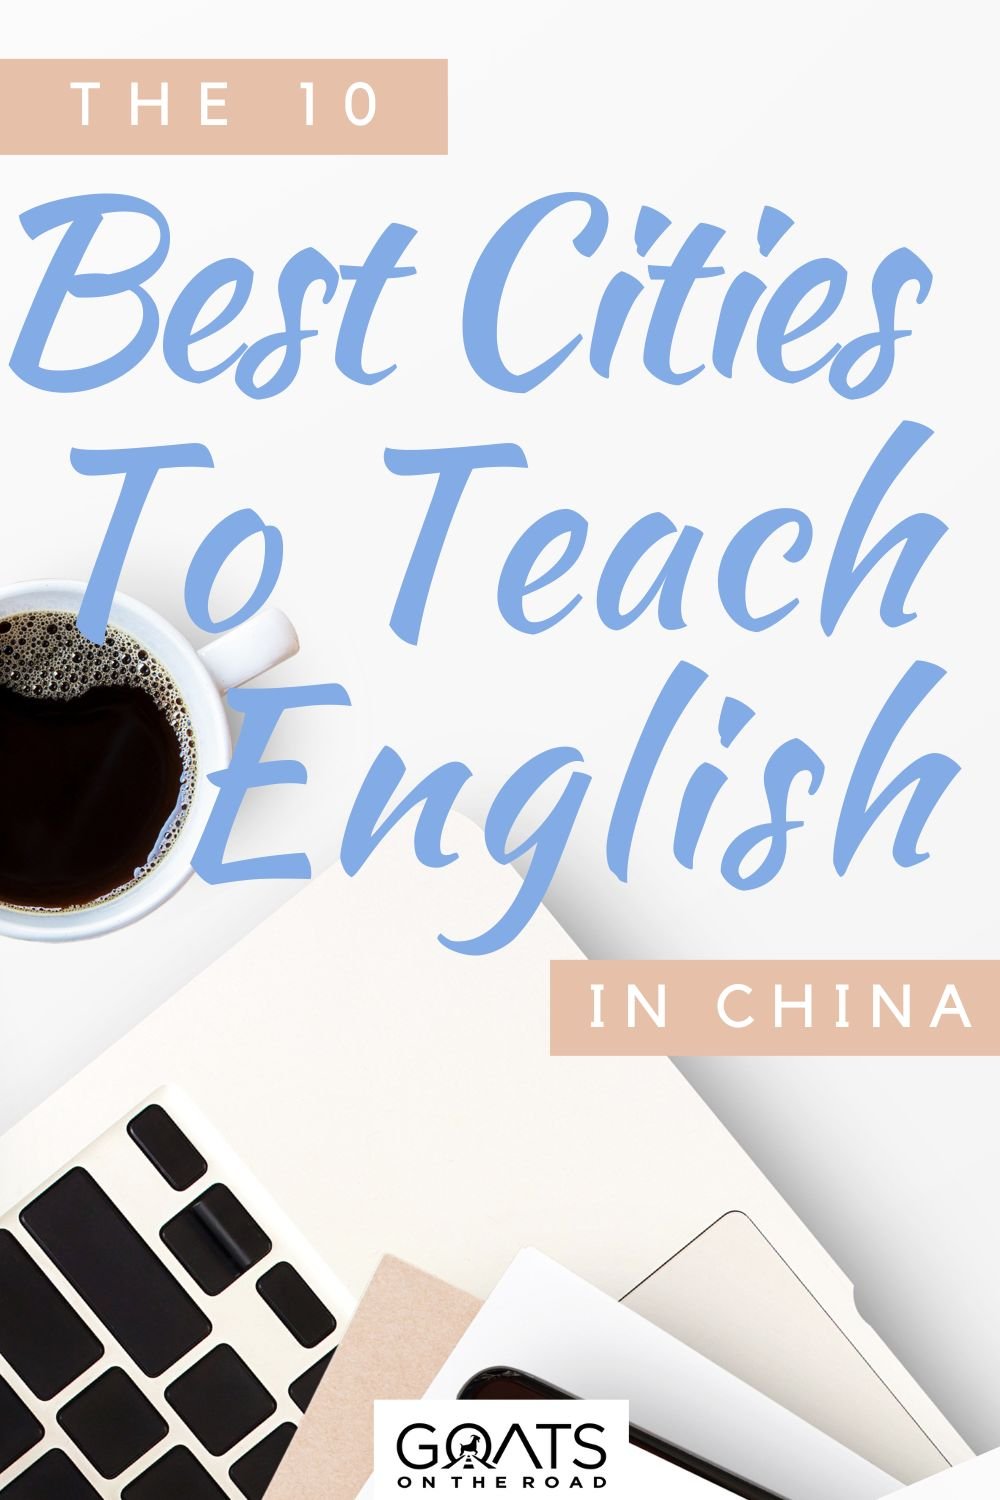 “The 10 Best Cities to Teach English in China